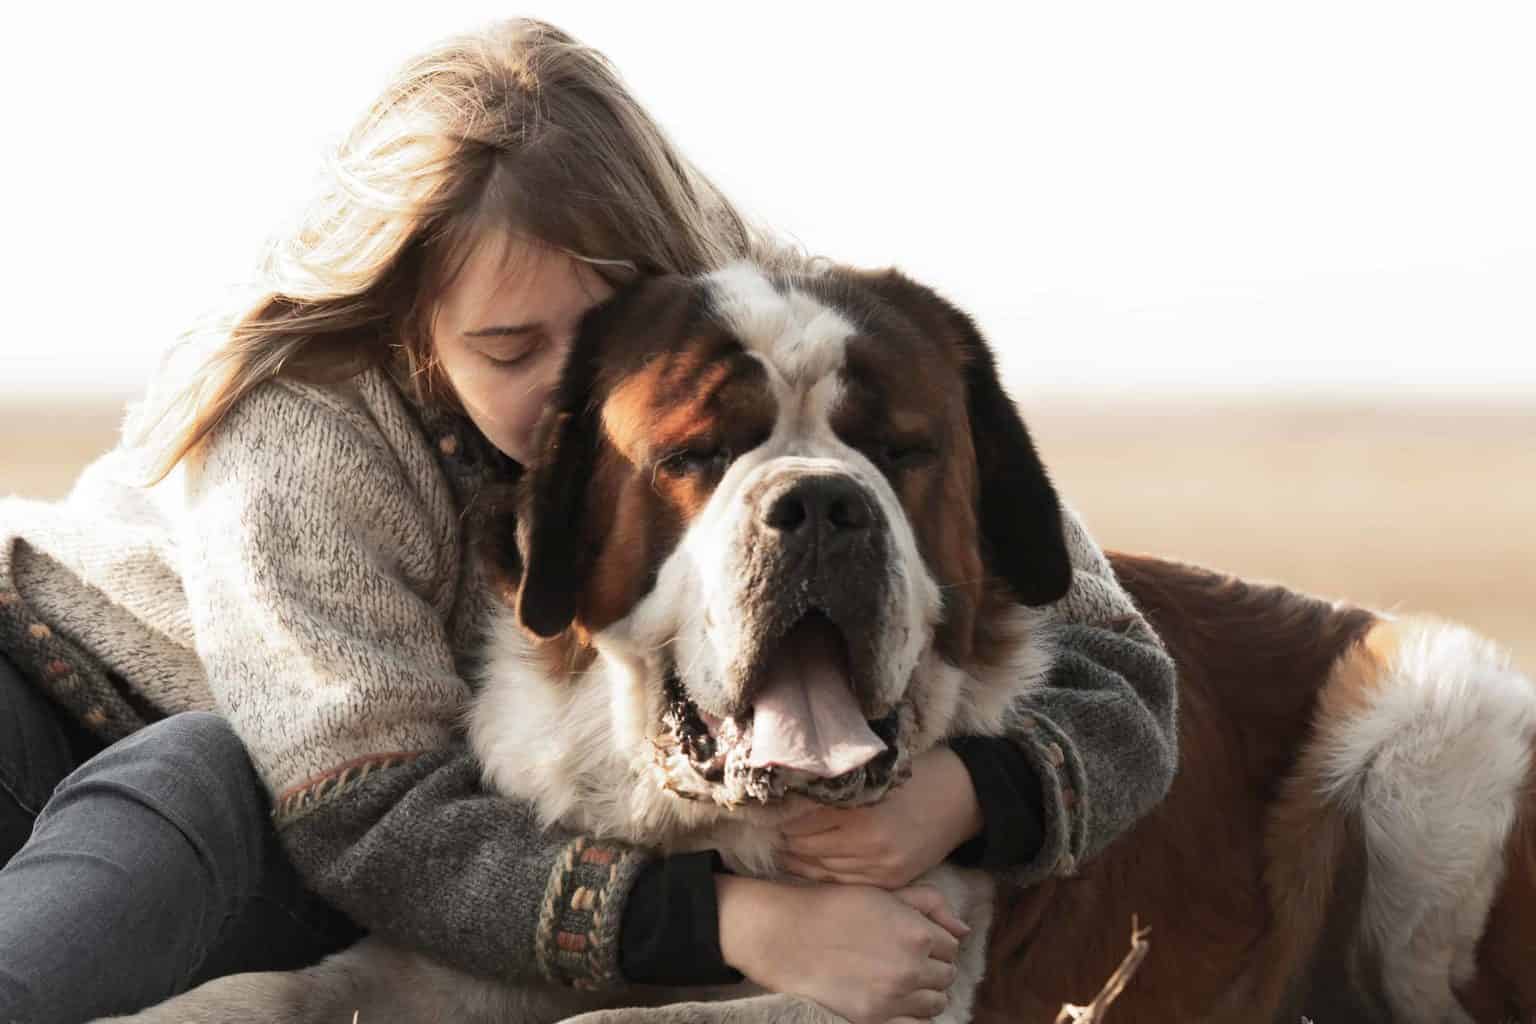 Woman hugs St. Bernard. If you're thinking of adopting one of the big dog breeds, check out our tips for practicing good safety habits to protect your dog.